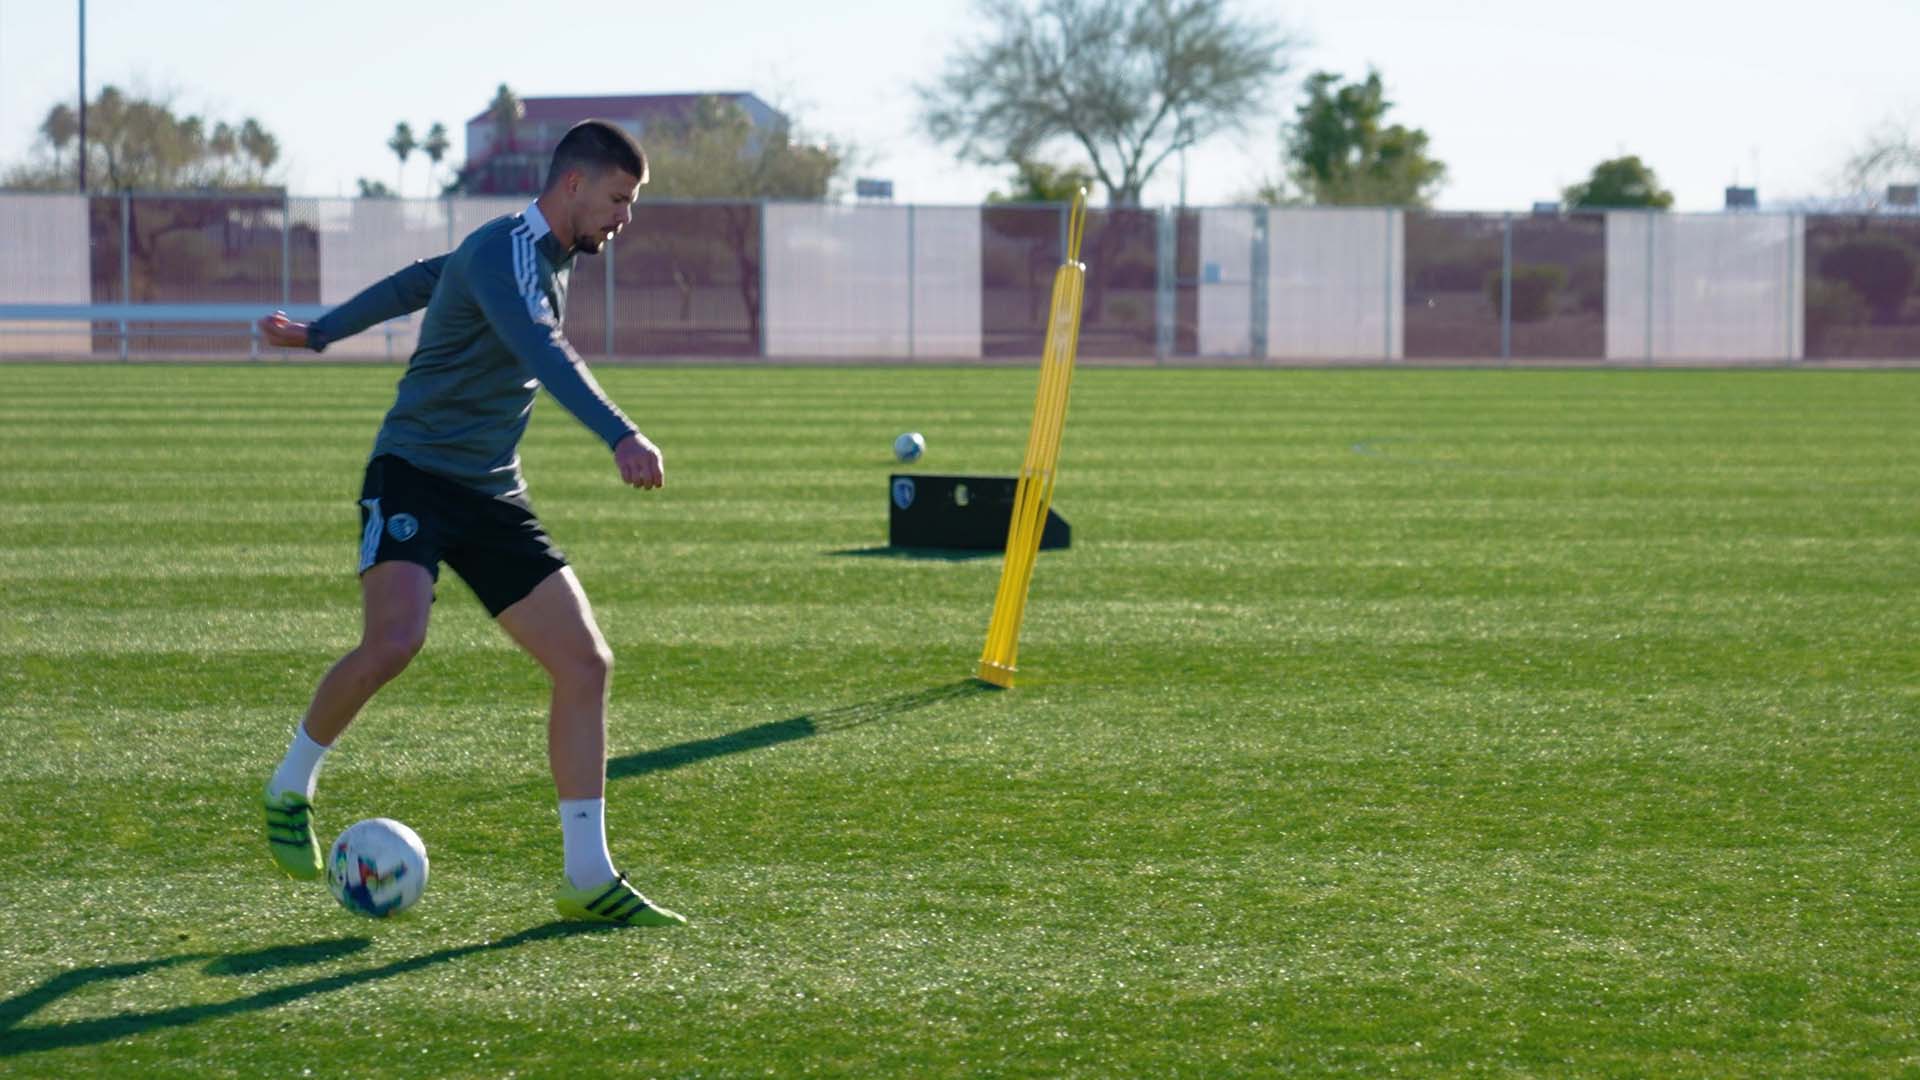 The keys to the best soccer agility training